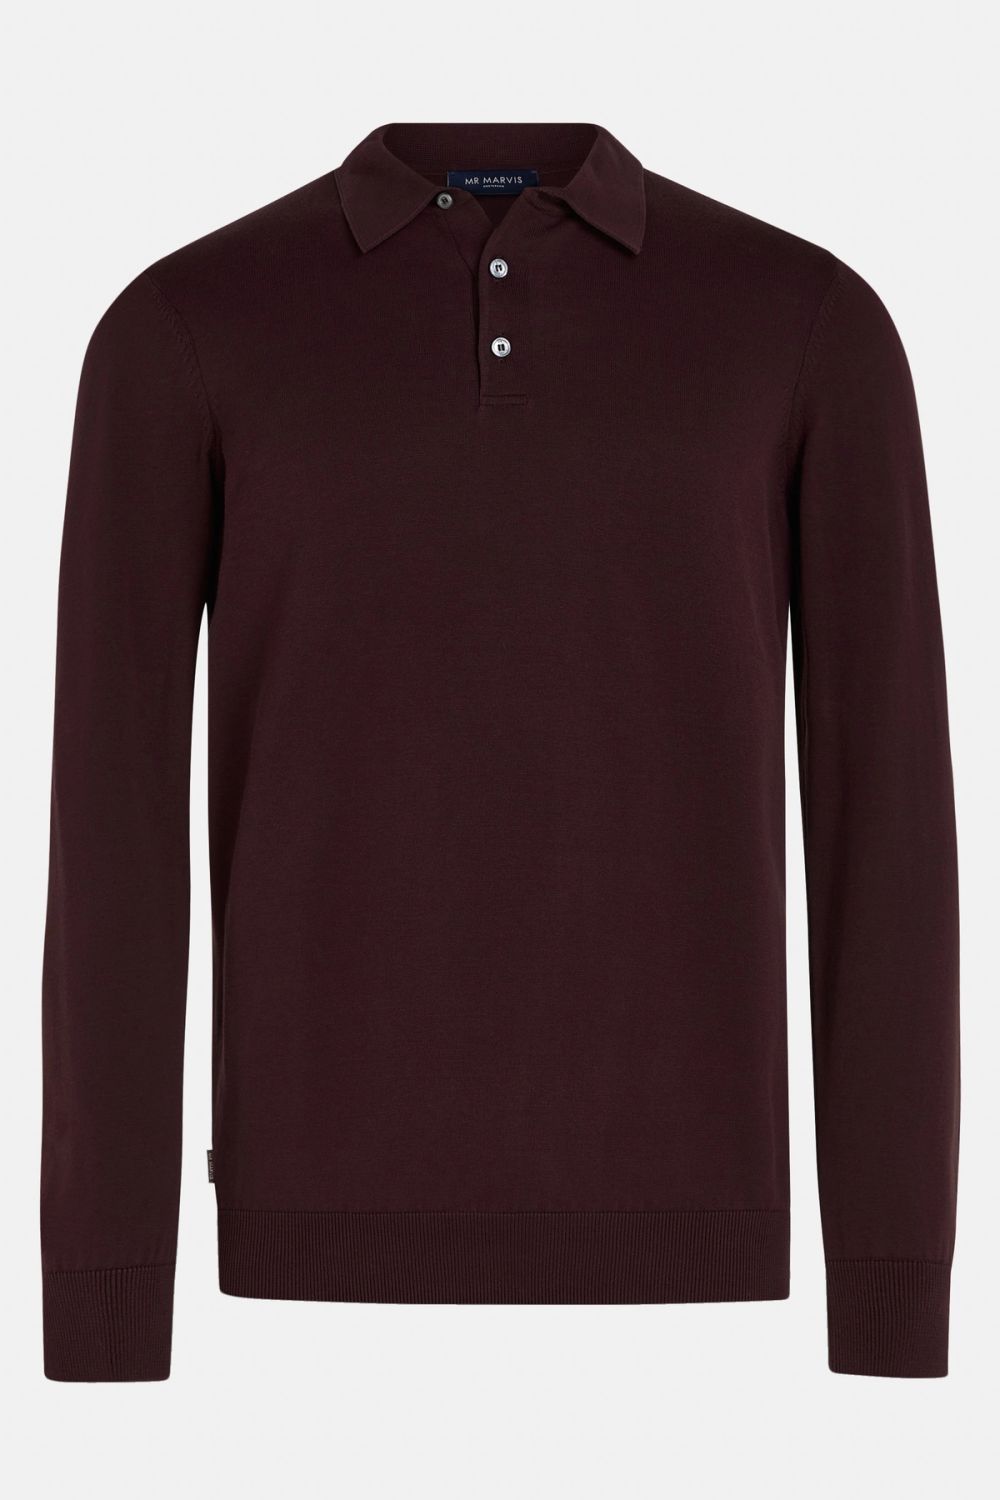 Reserves - The Polo Pullover